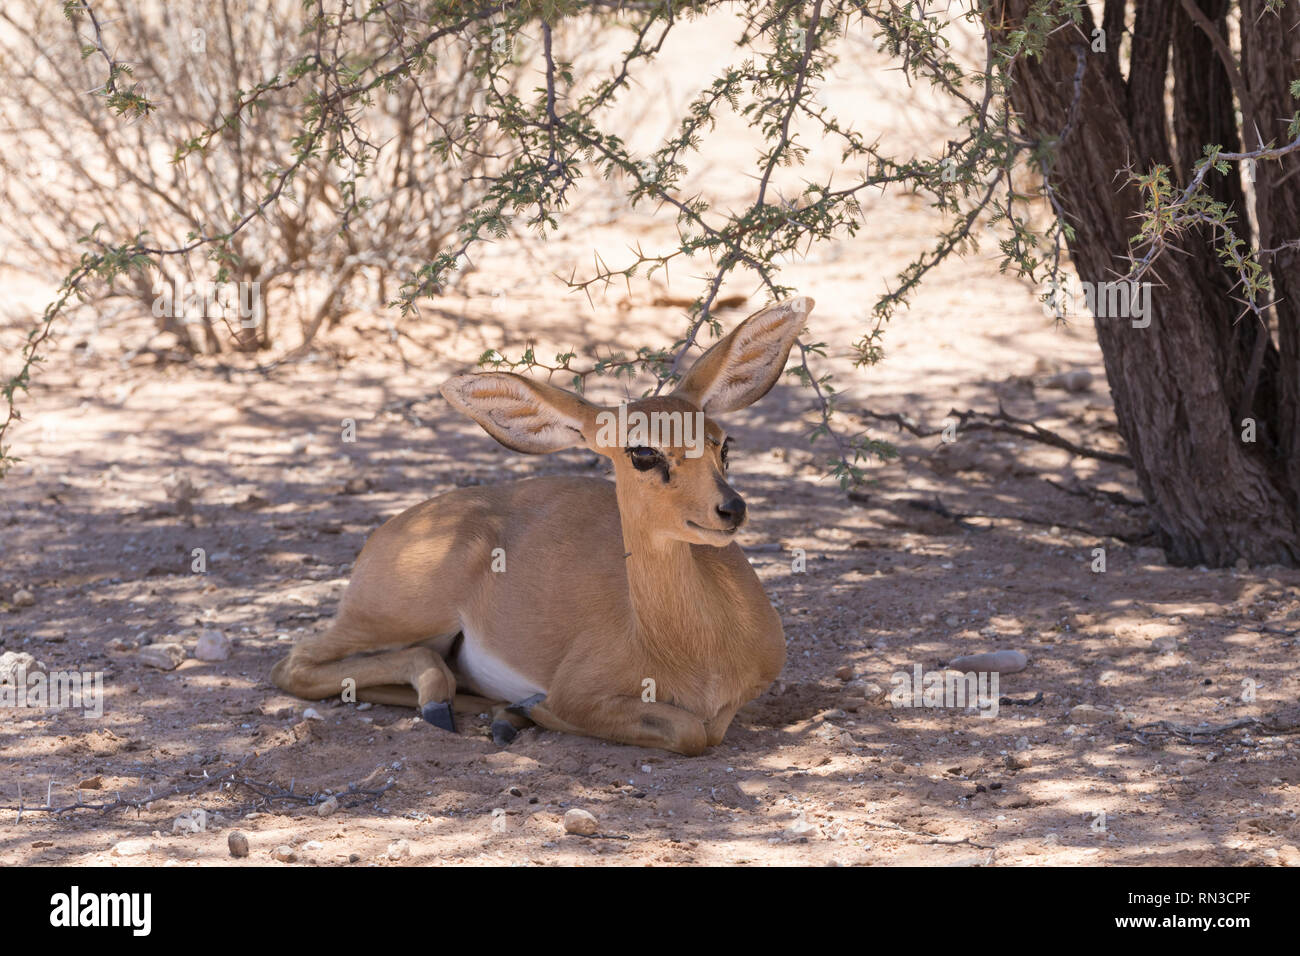 Small steenbok,  Raphicerus campestris, resting in shade under a tree, Kgalagadi Transfrontier Park, Northern Cape, South Africa. Can exist without fr Stock Photo